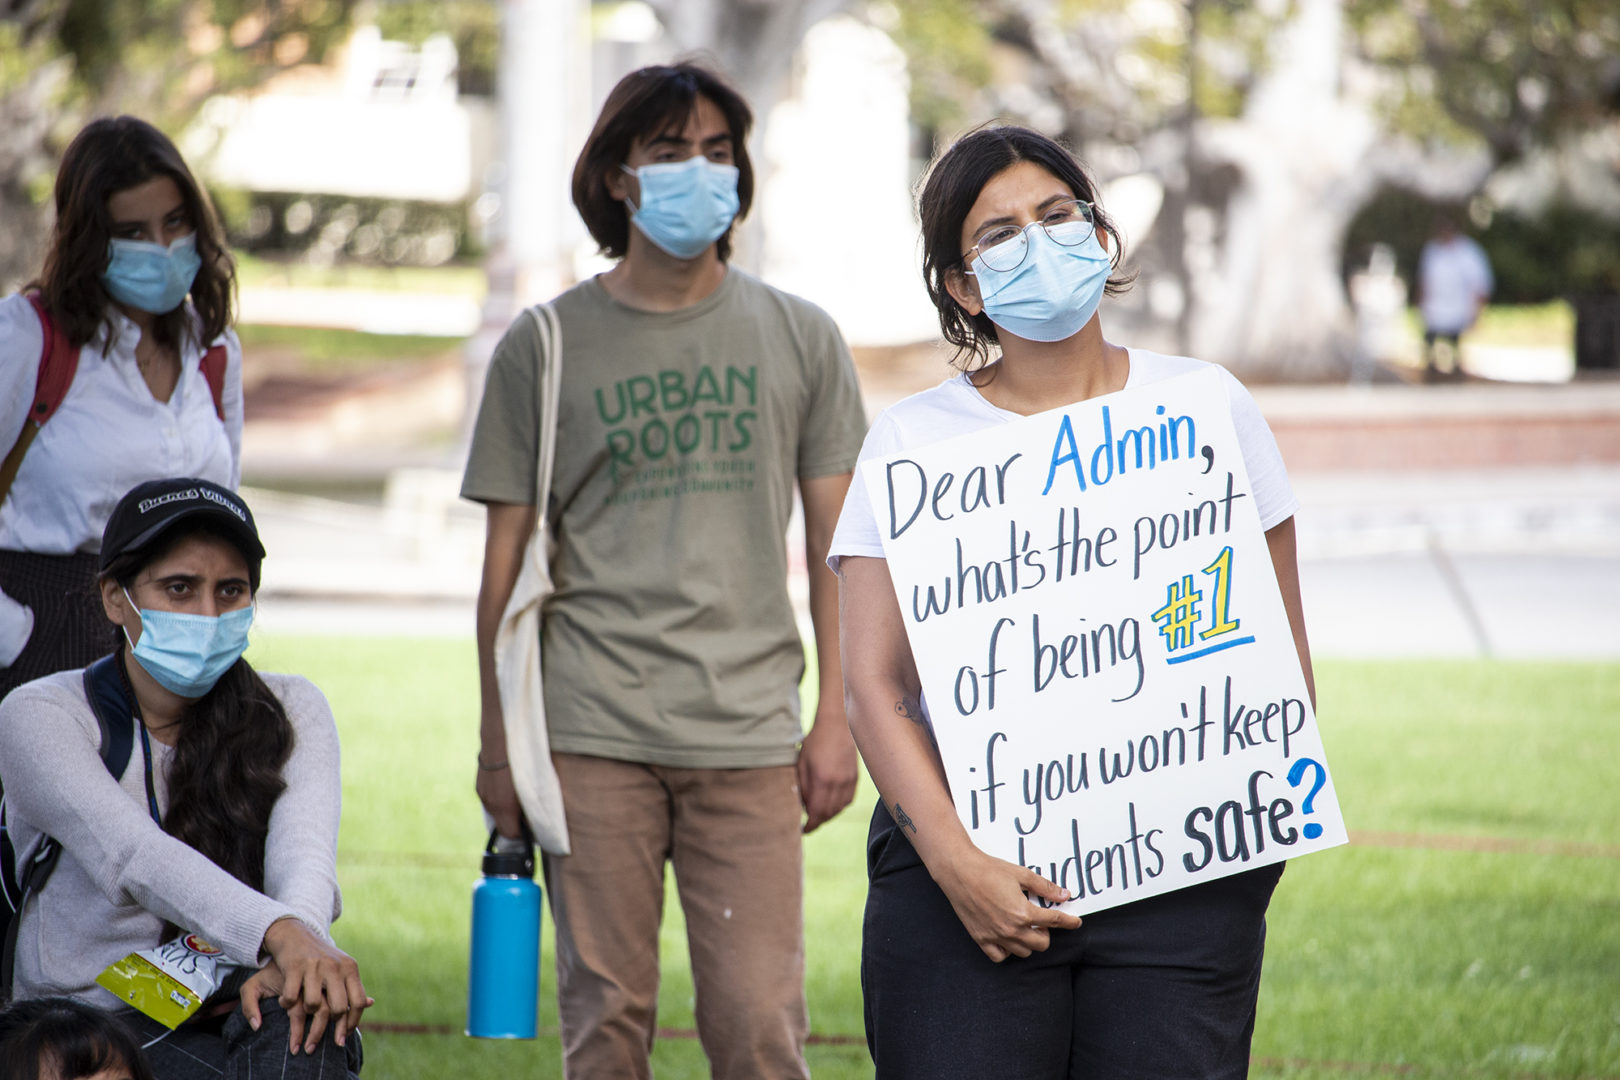 Students wearing face masks take part in the protest.  One with glasses is holding a sign saying 